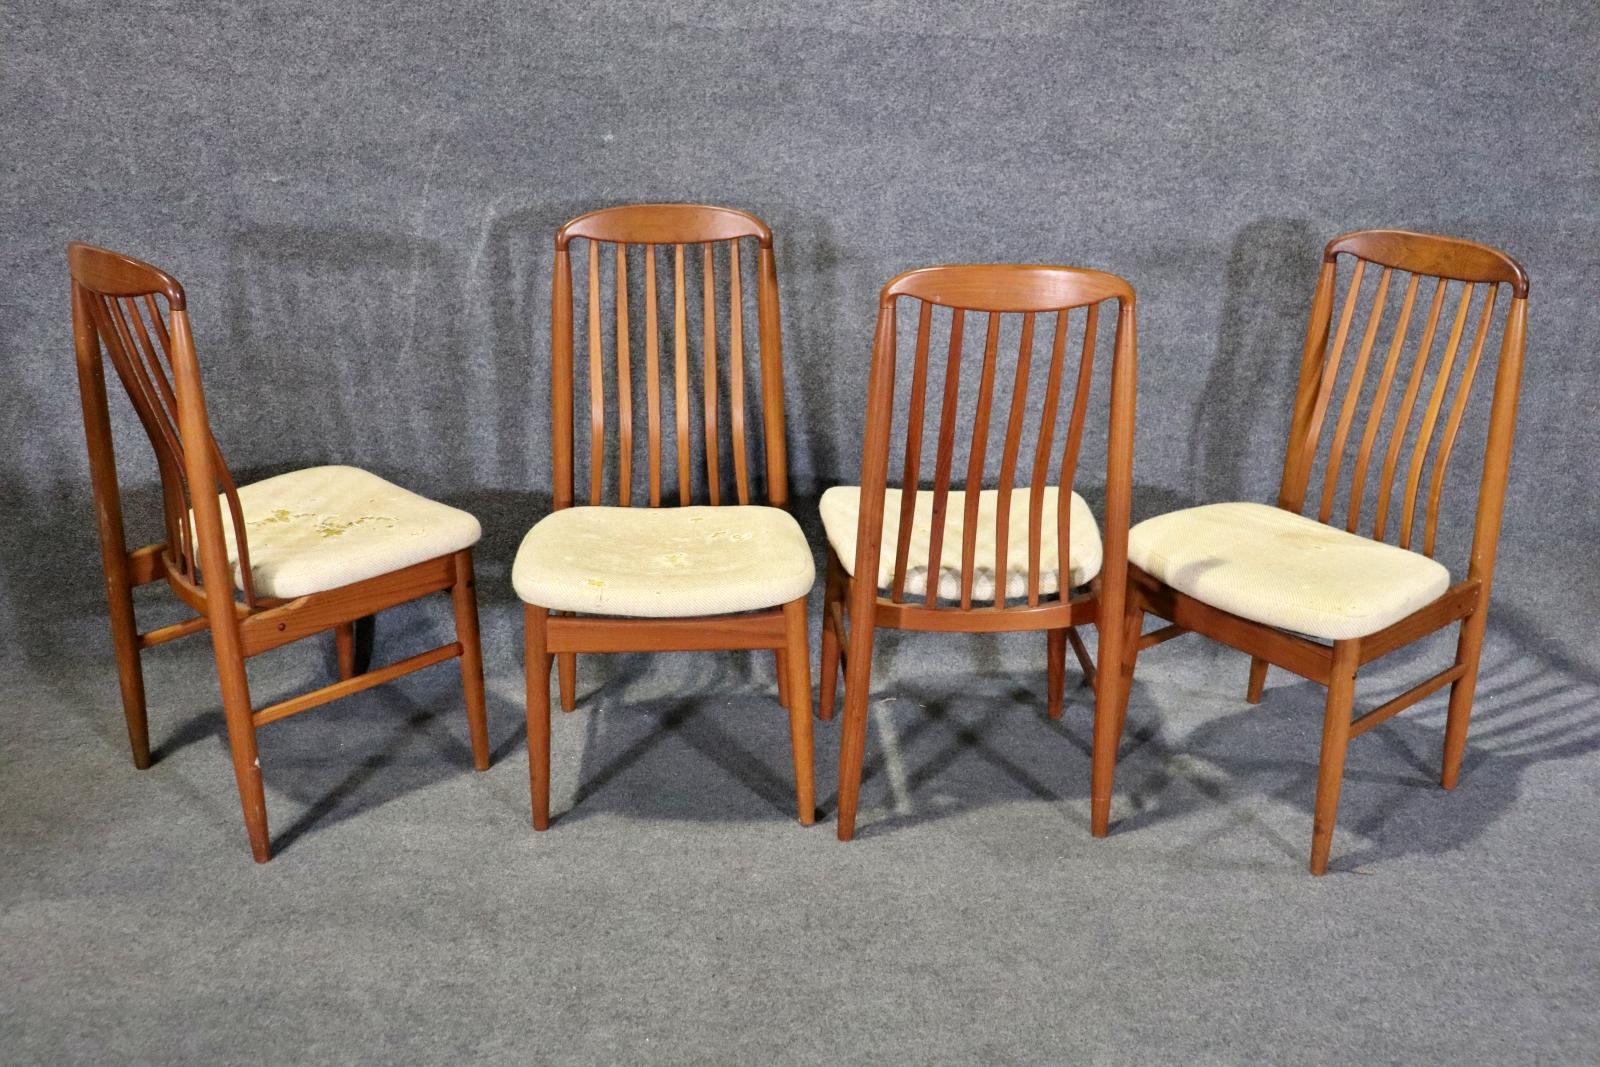 Set of eight Danish style dining chairs by Benny Linden. Soft teak frames with slat backs and foam cushions. Two arm chairs, six side chairs.
2 arm chairs measure 38 1/4